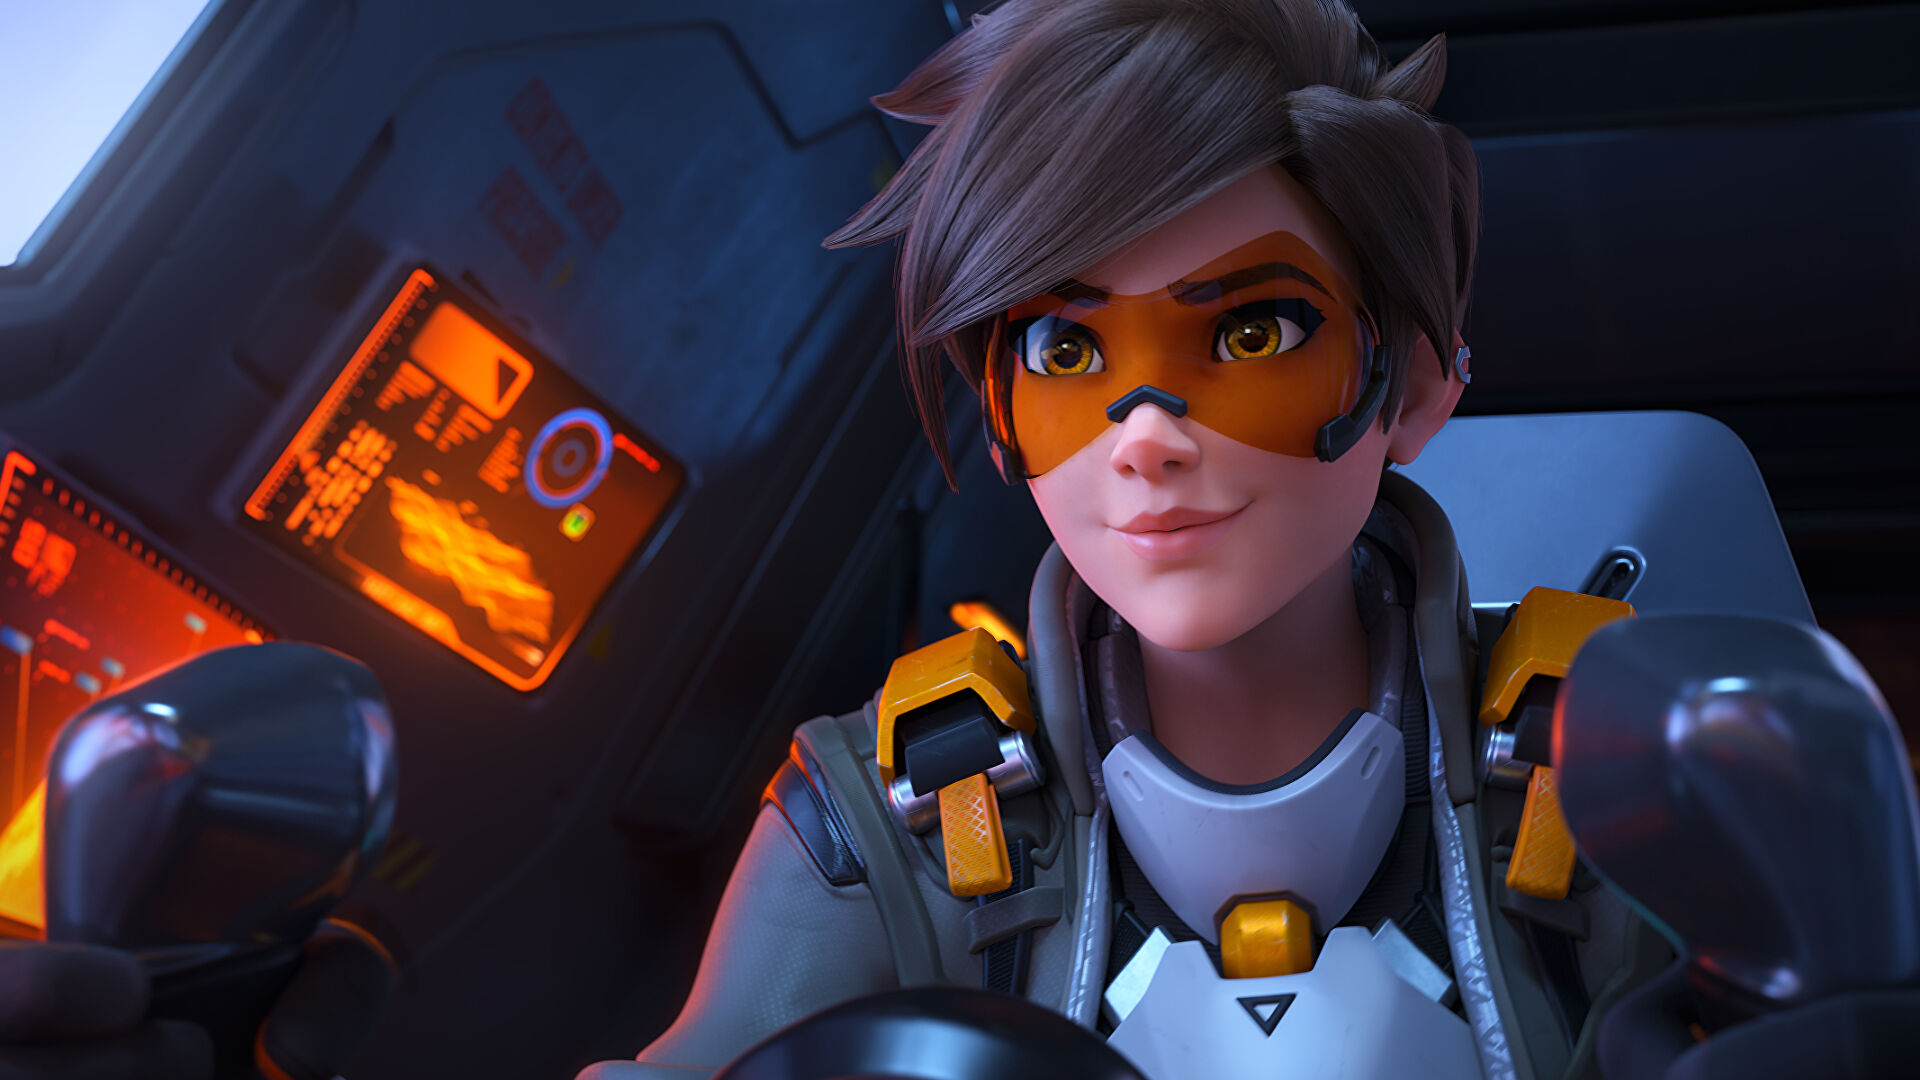 Overwatch 2’s frustrating phone registration requirement axed for most players